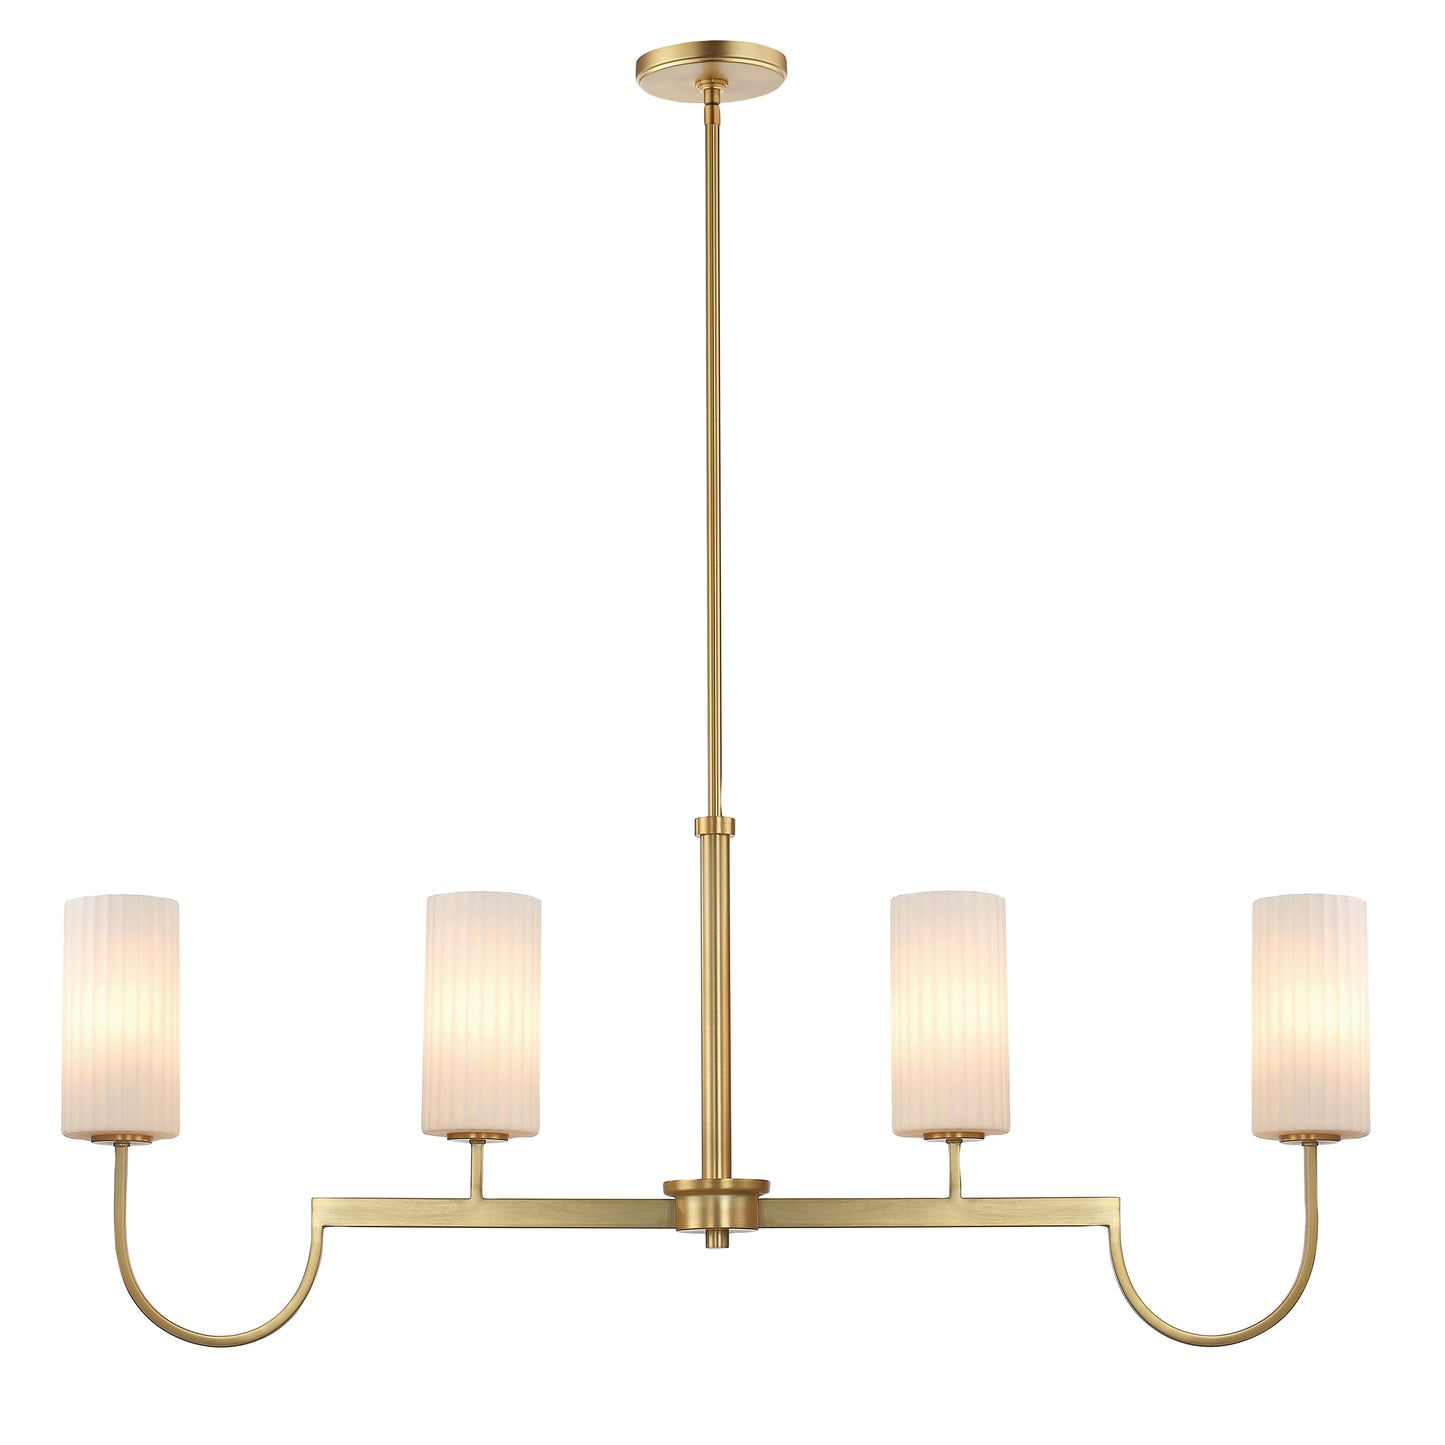 32004SWSBR - 4 Light Town and Country 43" Chandelier - Satin Brass